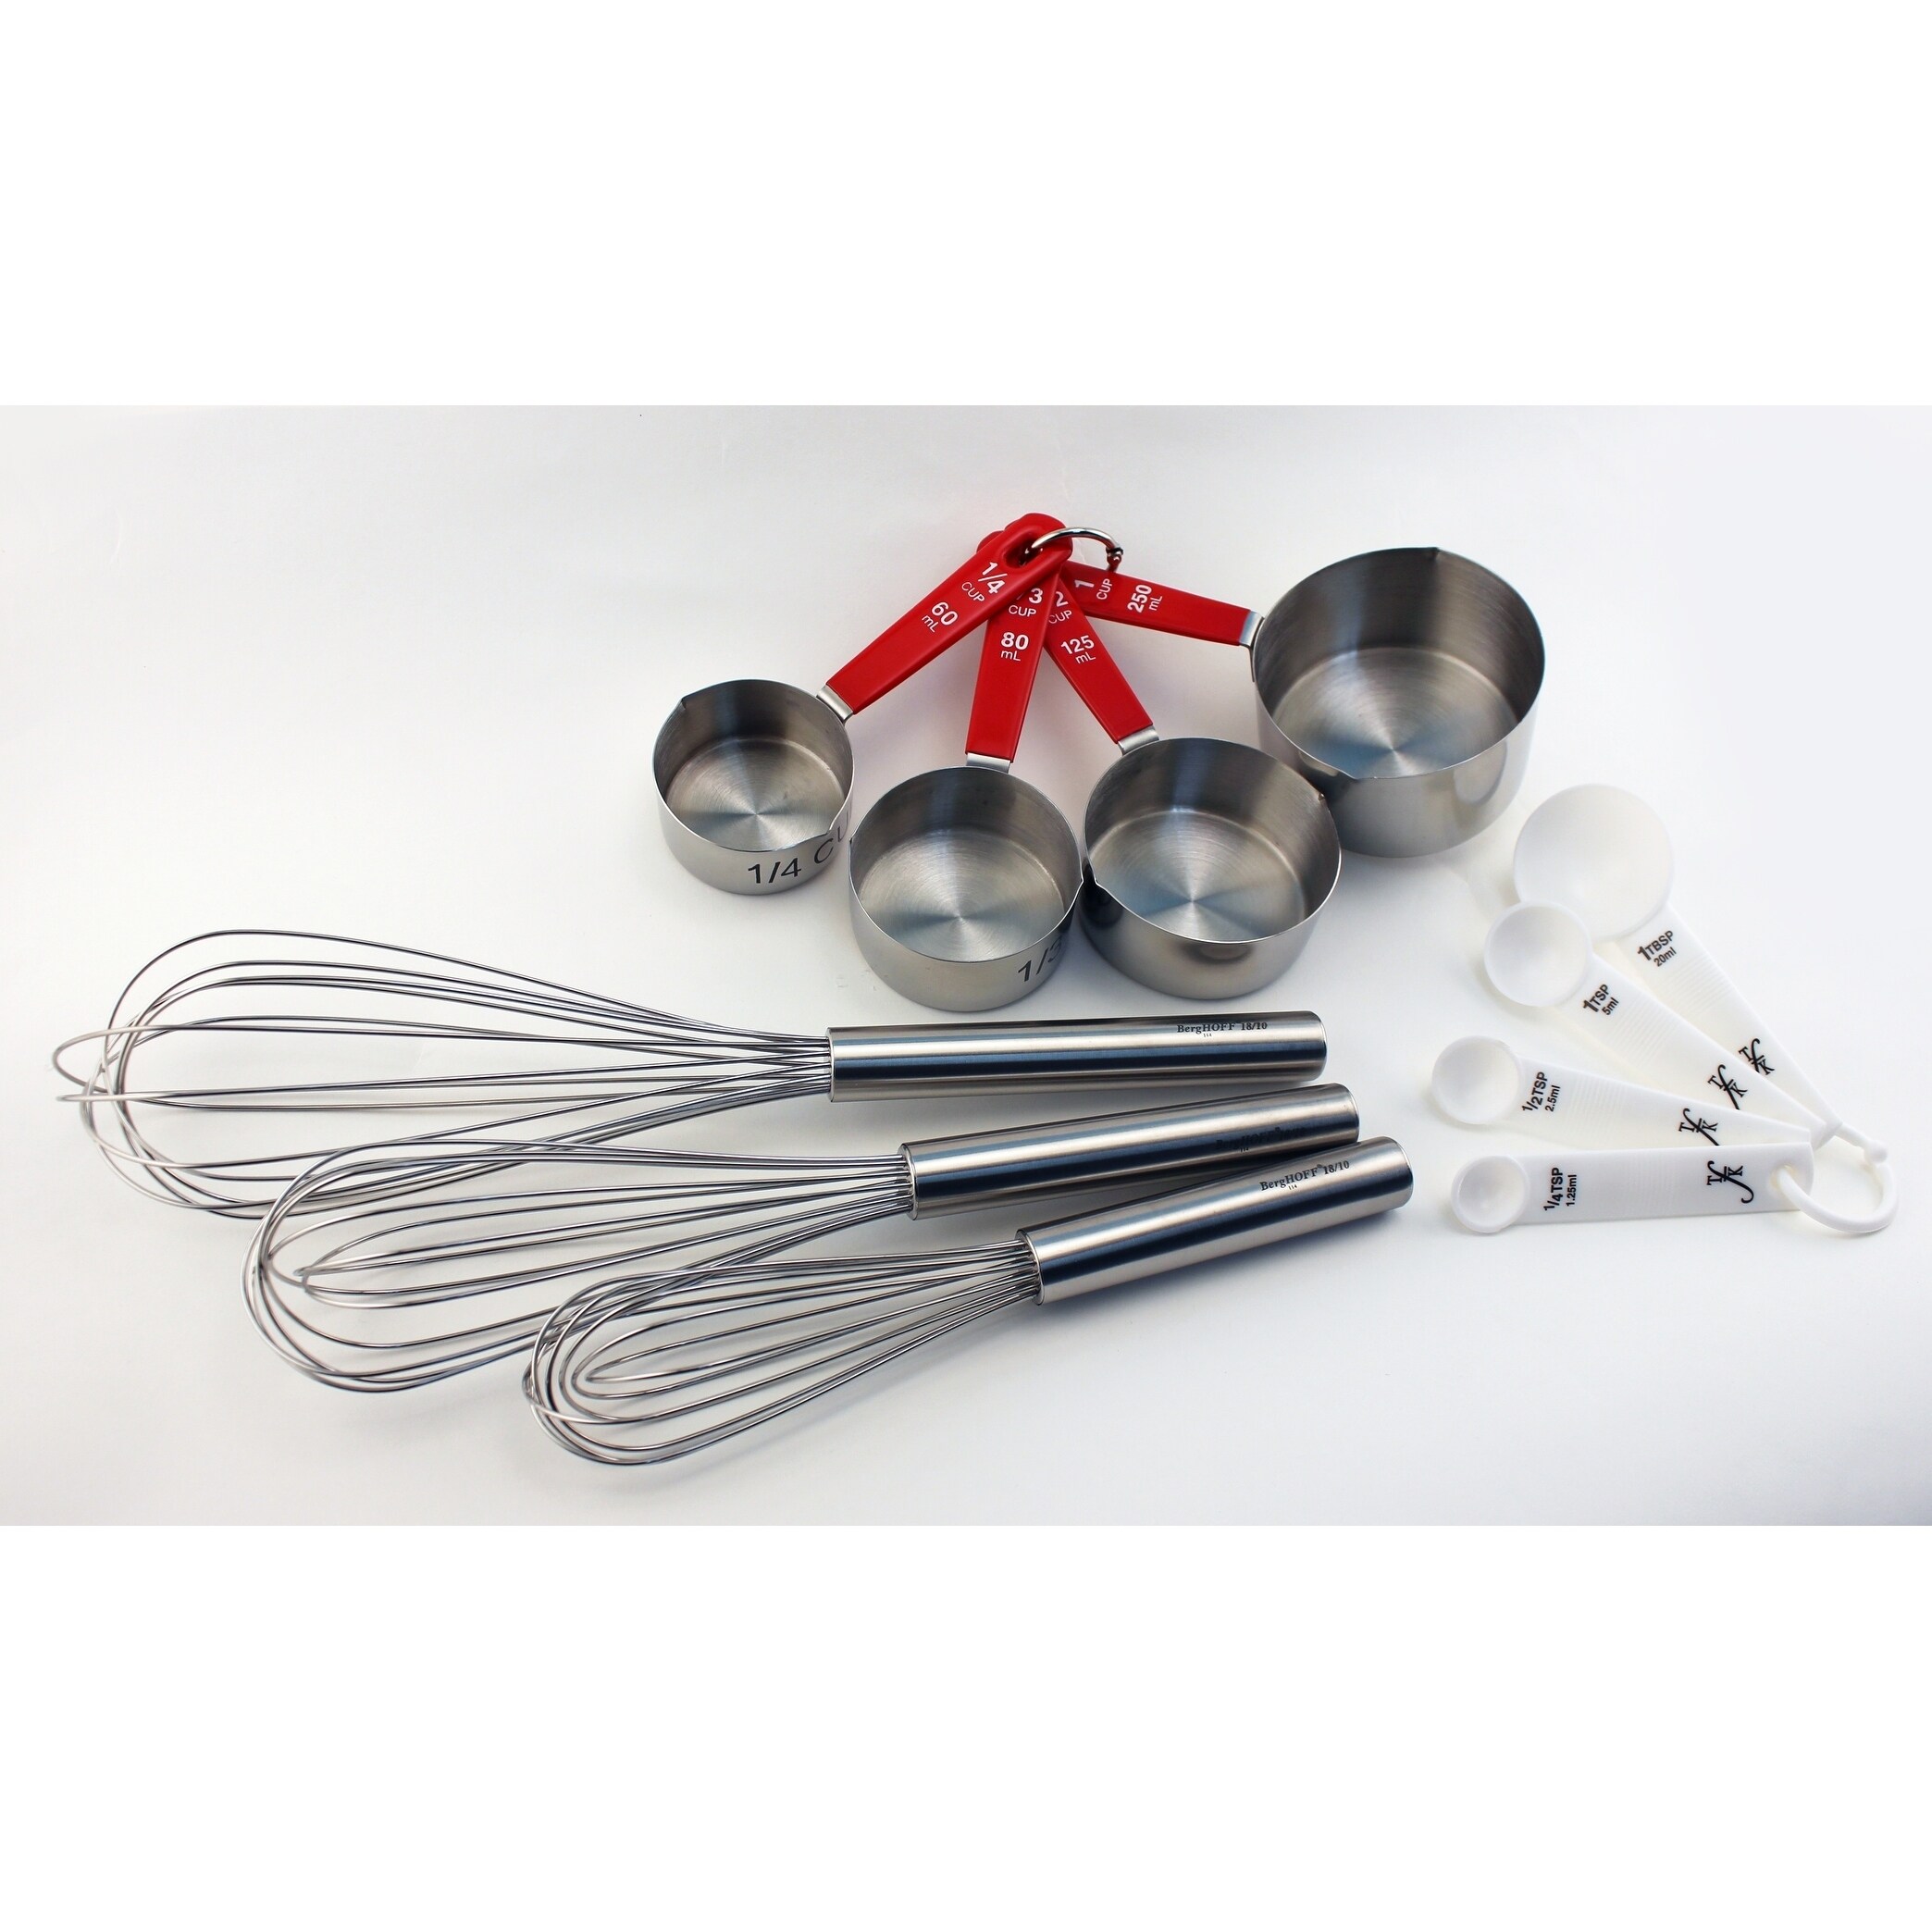 https://ak1.ostkcdn.com/images/products/18610811/BakIng-Tool-Set-11pc-18-10-Stainless-Steel-3pc-SS-Whisk-4pc-SS-Meas-Cup-4pc-Meas-Spns-set-bad2b6aa-821a-45d9-9fd6-748603cc87ef.jpg